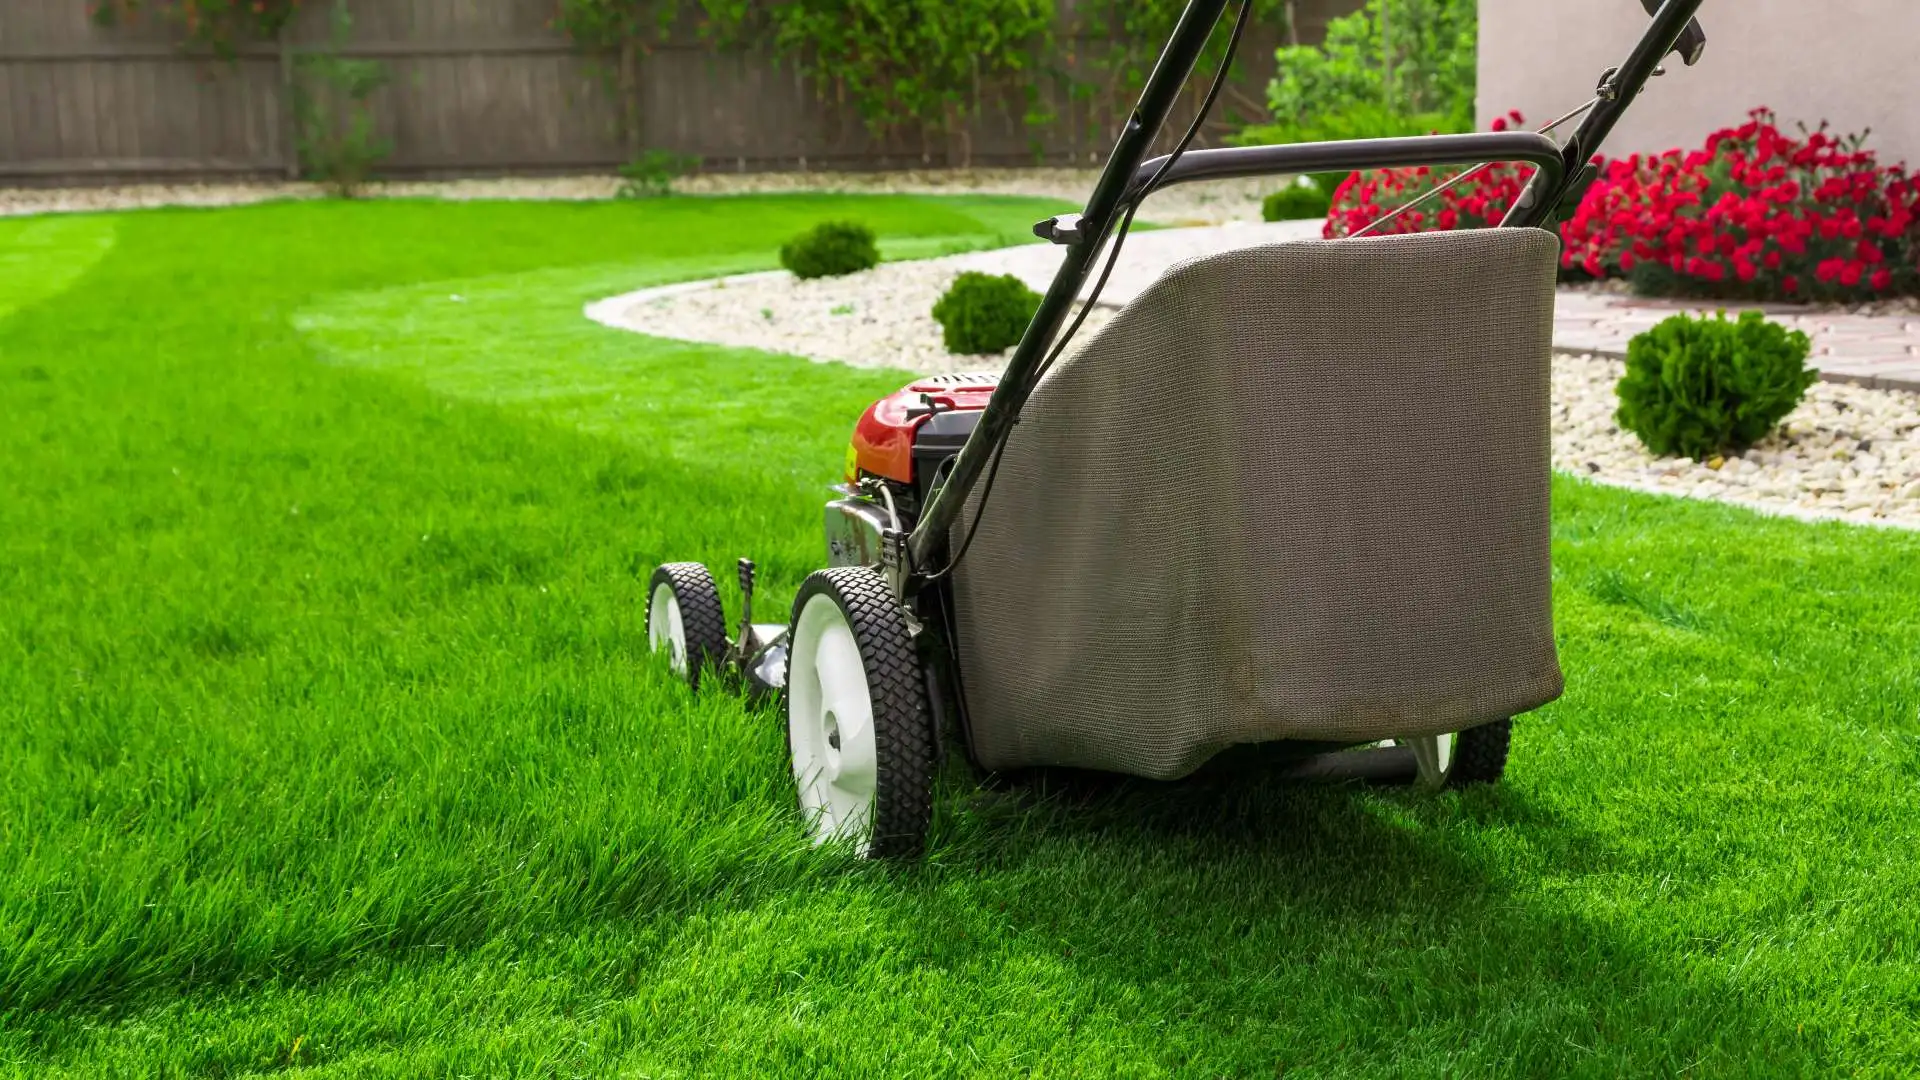 Ready to Mow Your Sod for the First Time? Follow These 3 Tips!